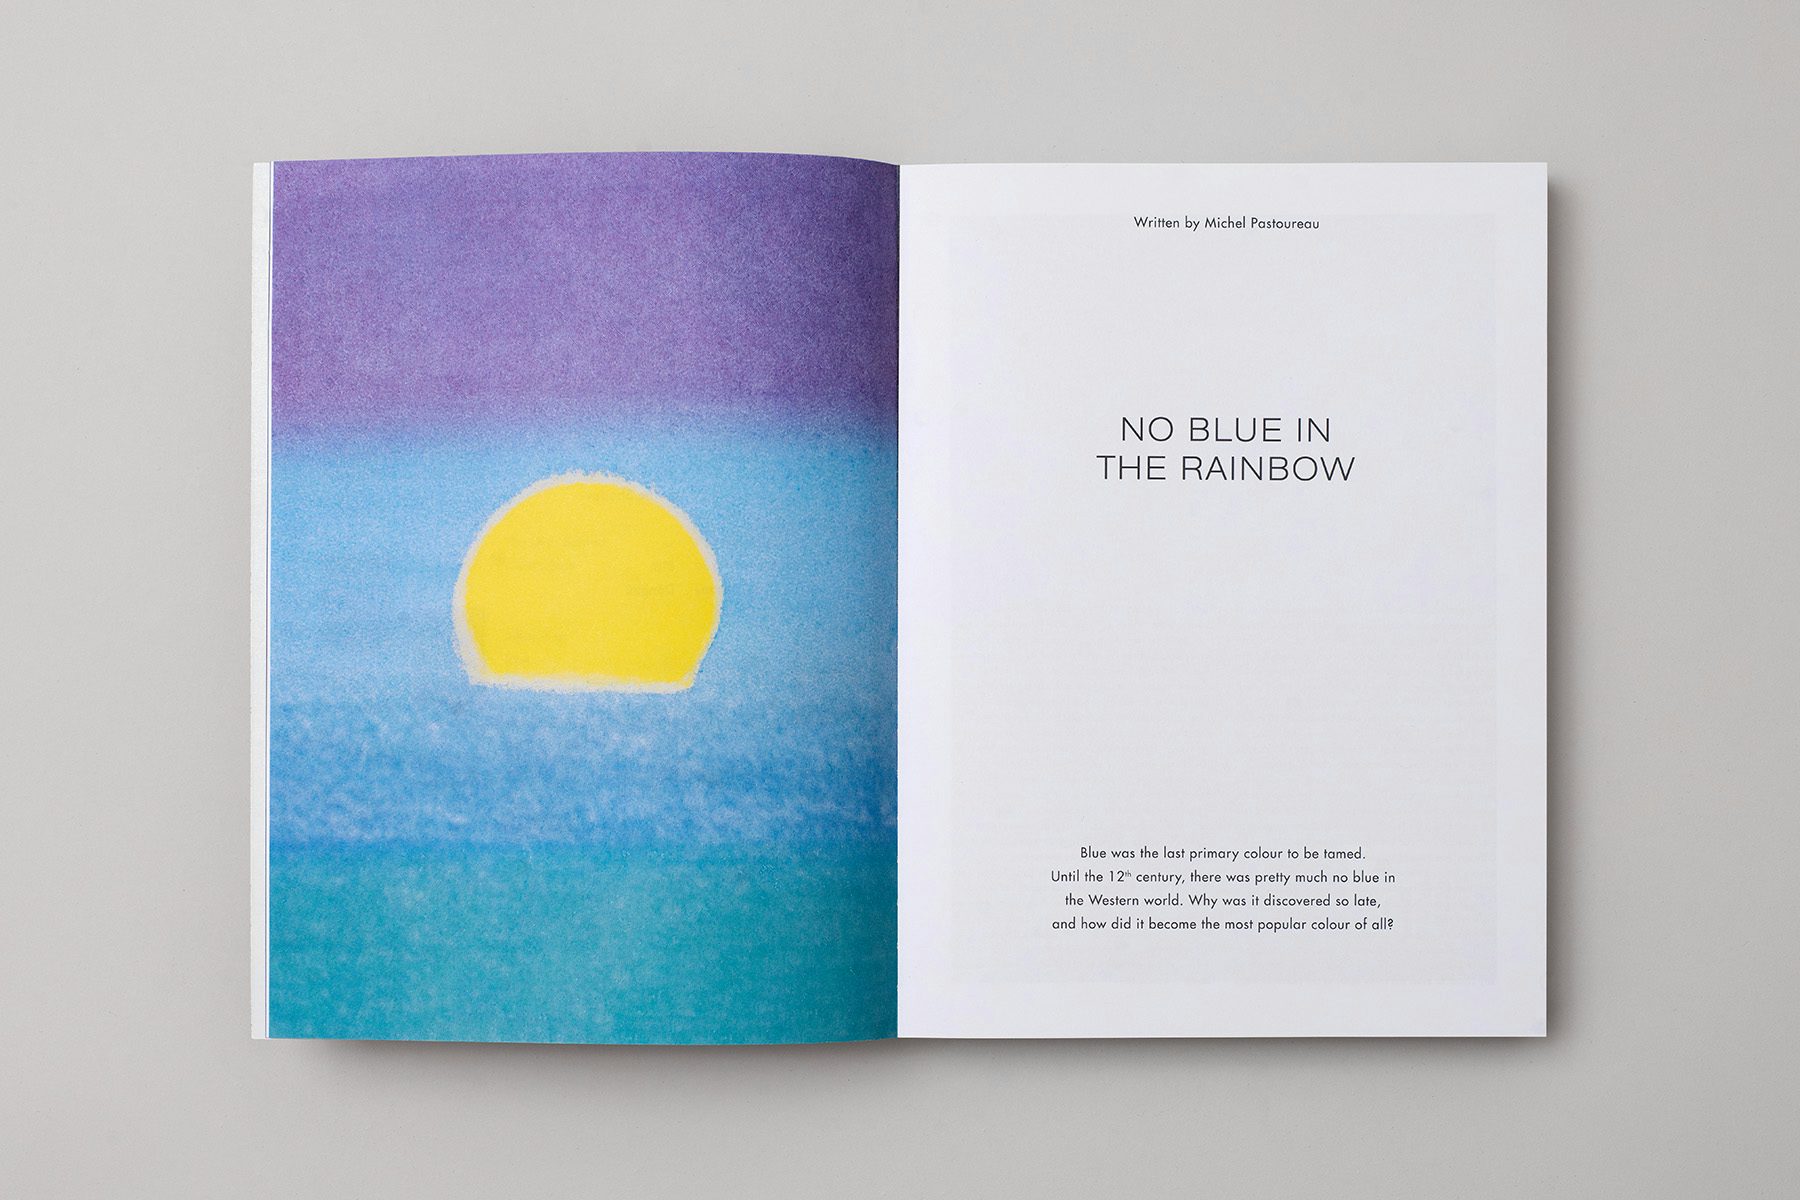 Photograph of a spread from the Blue issue of The Colour Journal, showing a print by Andy Warhol of a yellow sun dipping into blue waters on the left hand page, and text on the right hand page headlined 'No blue in the rainbow'